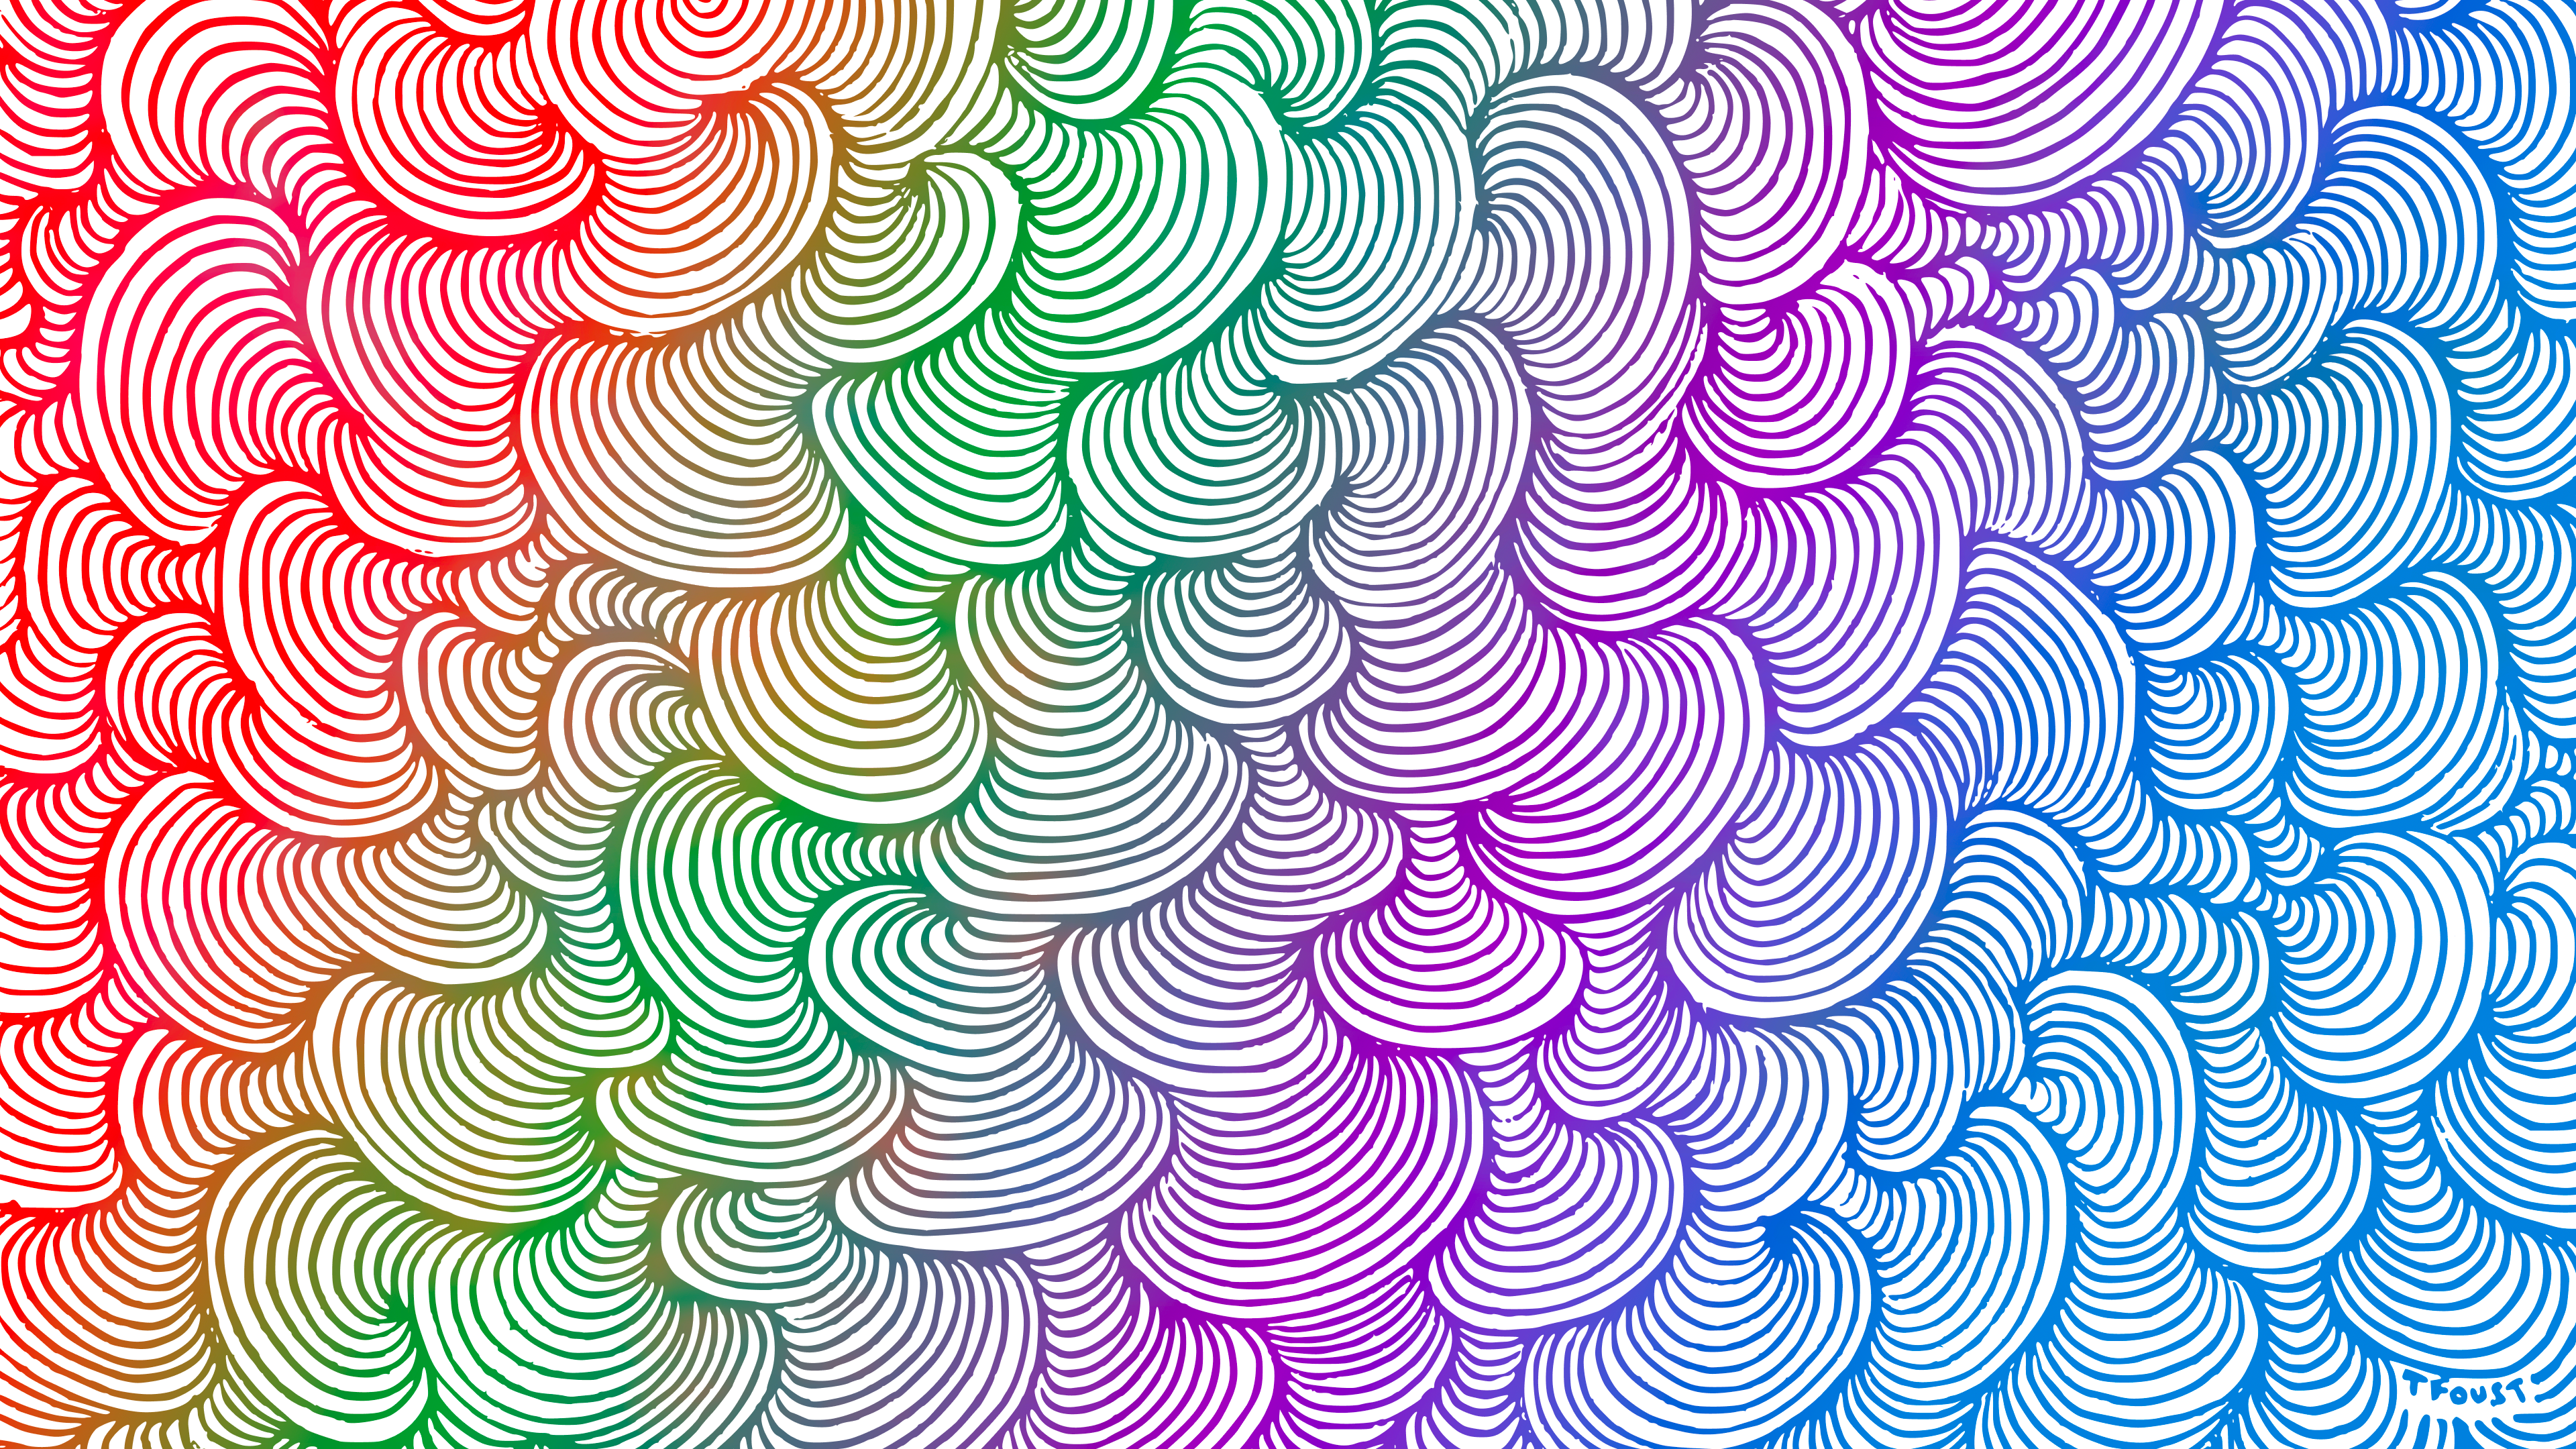 General 3840x2160 pattern reddit abstract colorful